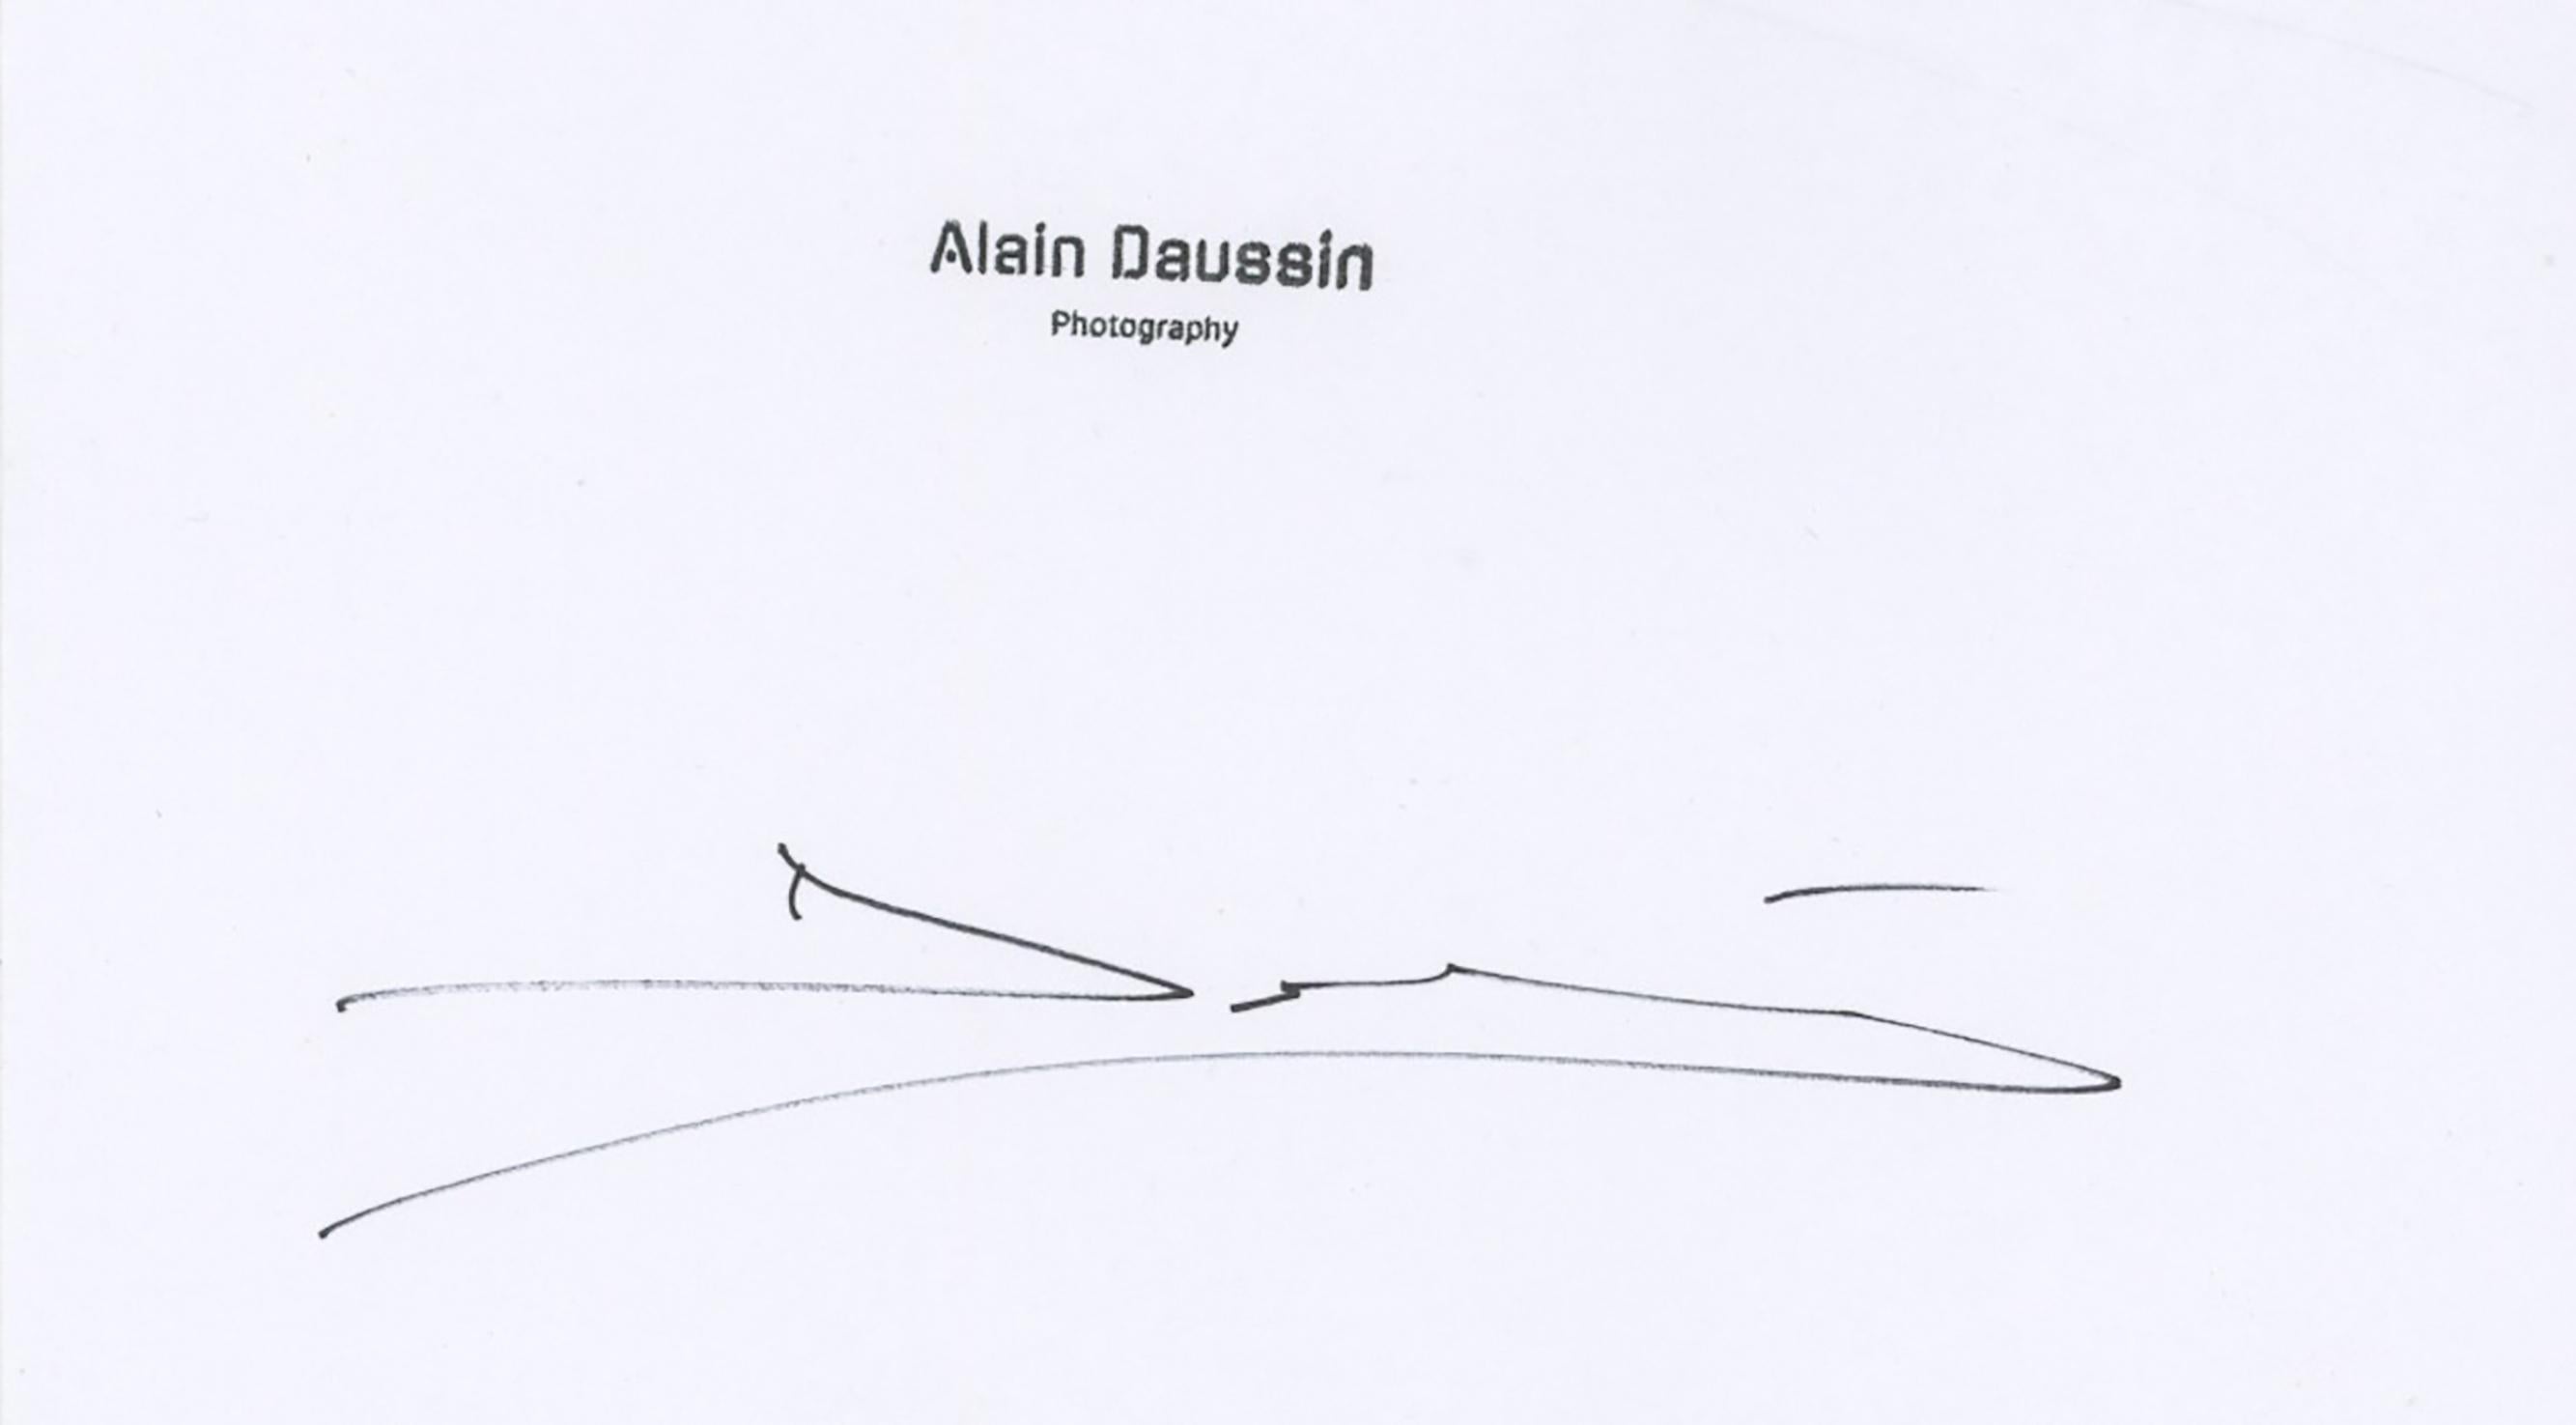 ALAIN DAUSSIN 

Signed by the artist on the back and certificate  
Format 40X50 cm 
Baryta paper 
Numbered /30 ex  
Selling price : 1980 euros 